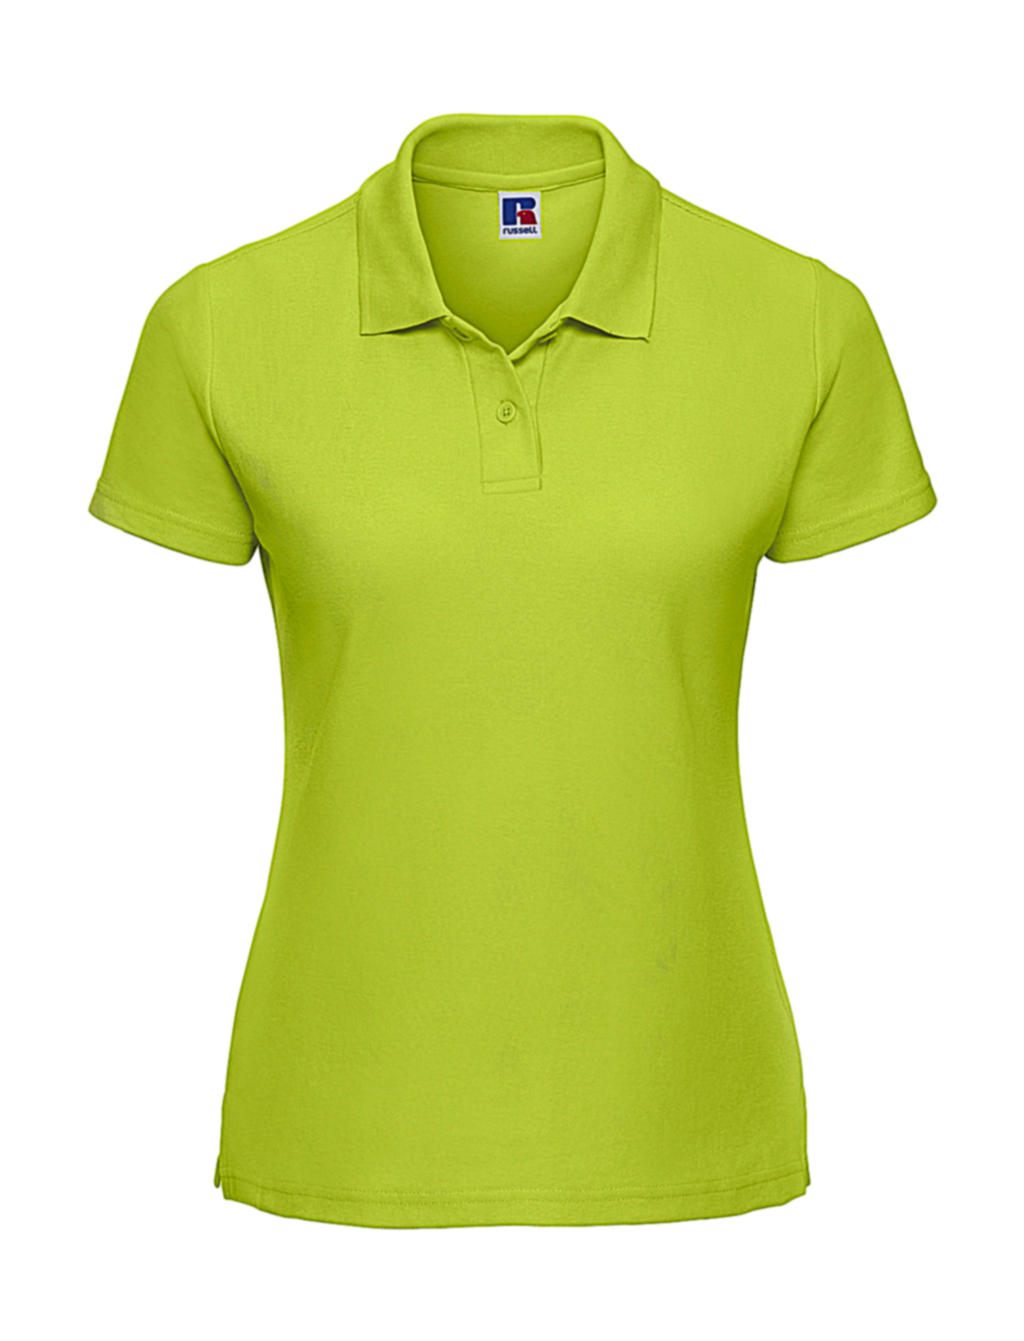  Ladies Classic Polycotton Polo in Farbe Lime